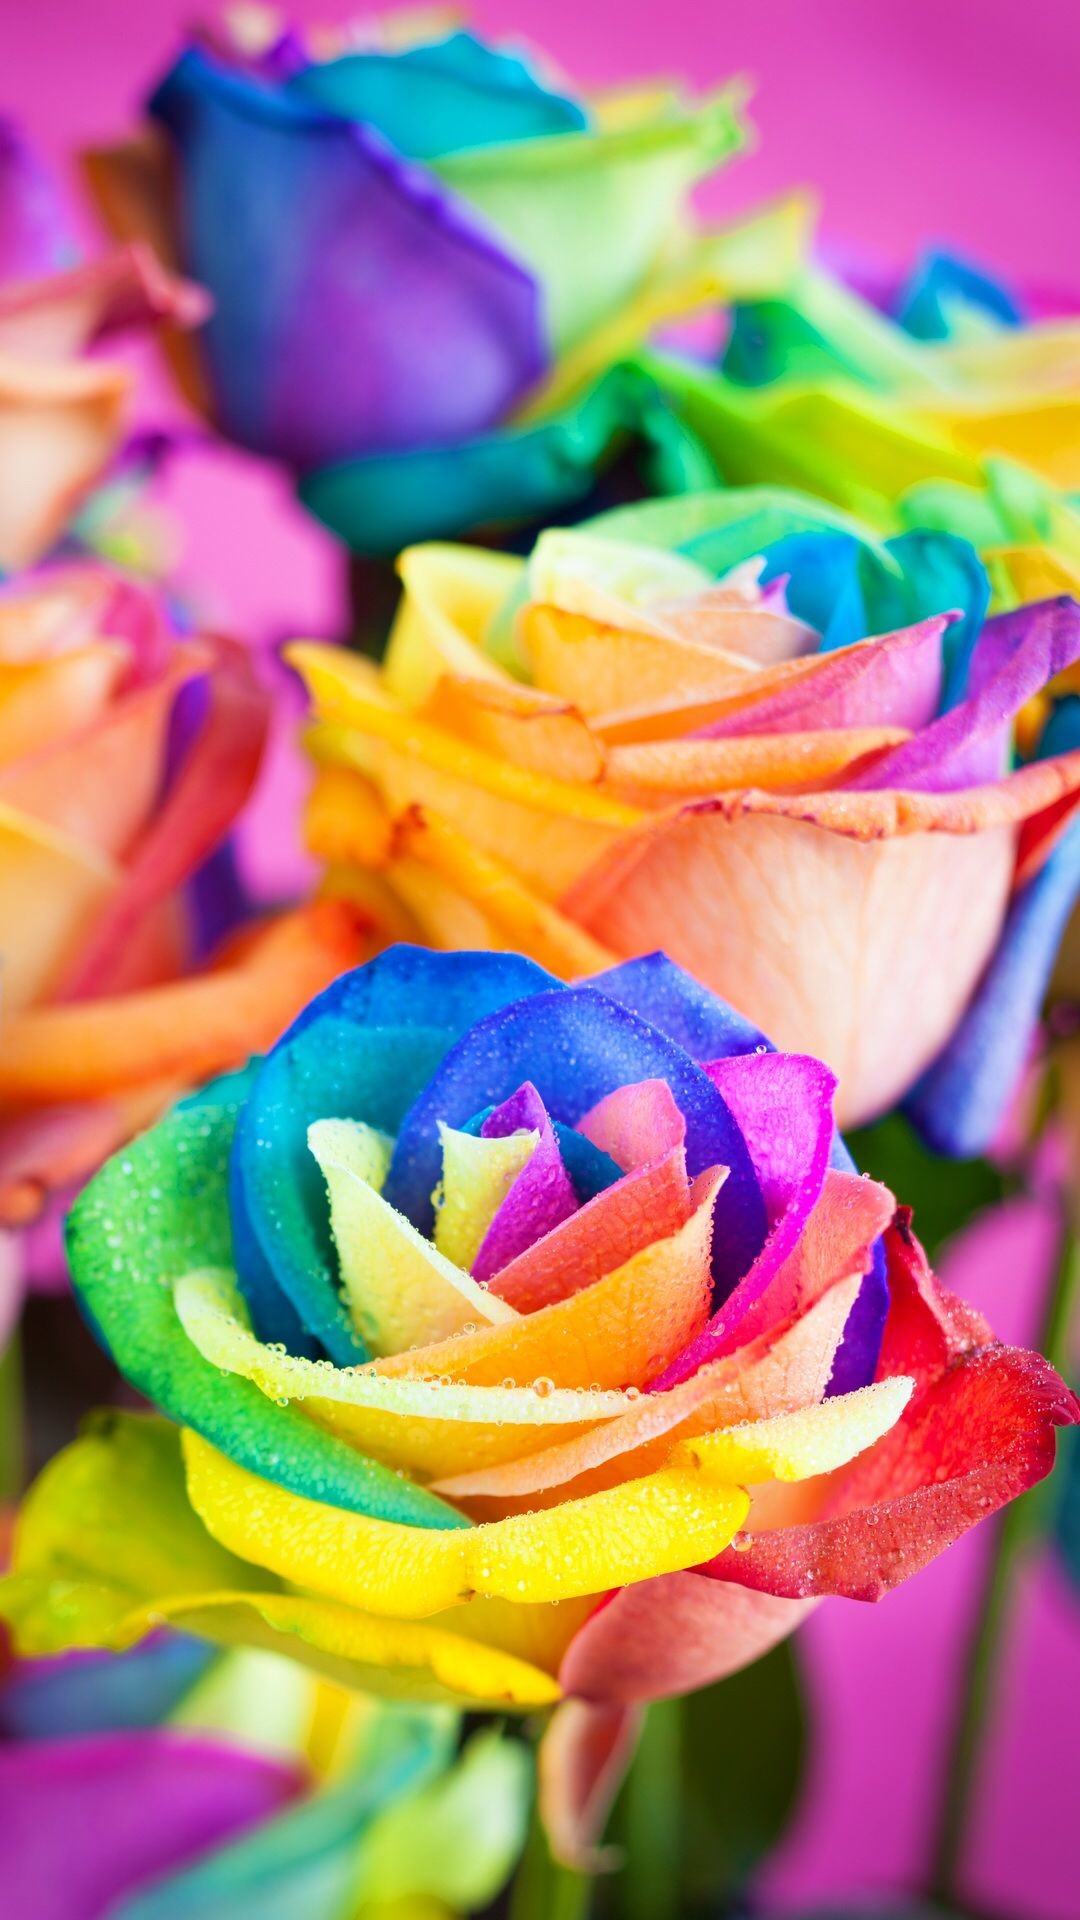 1080x1920, Checkout This Wallpaper For Your Iphone - Colorful Flowers Wallpaper For Iphone - HD Wallpaper 